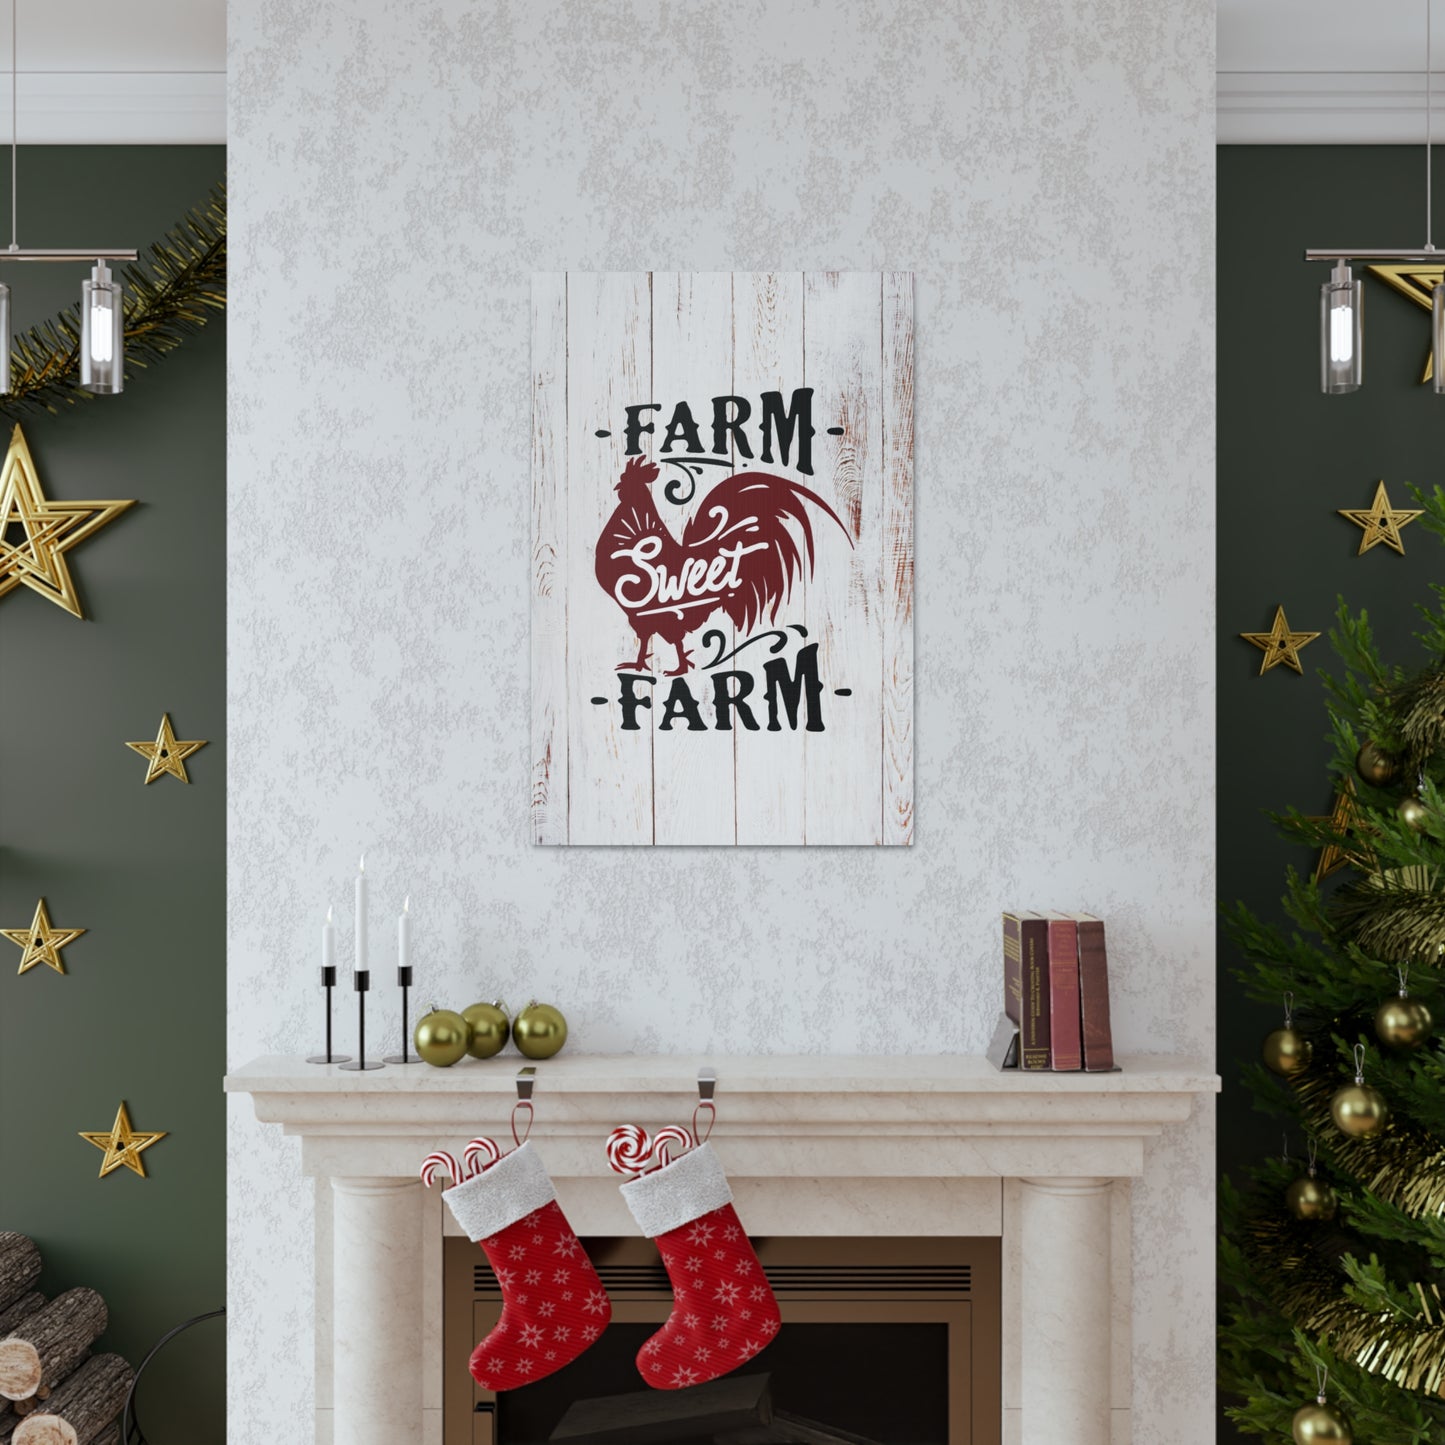 "Farm Sweet Farm" Farmhouse Wall Art - Weave Got Gifts - Unique Gifts You Won’t Find Anywhere Else!